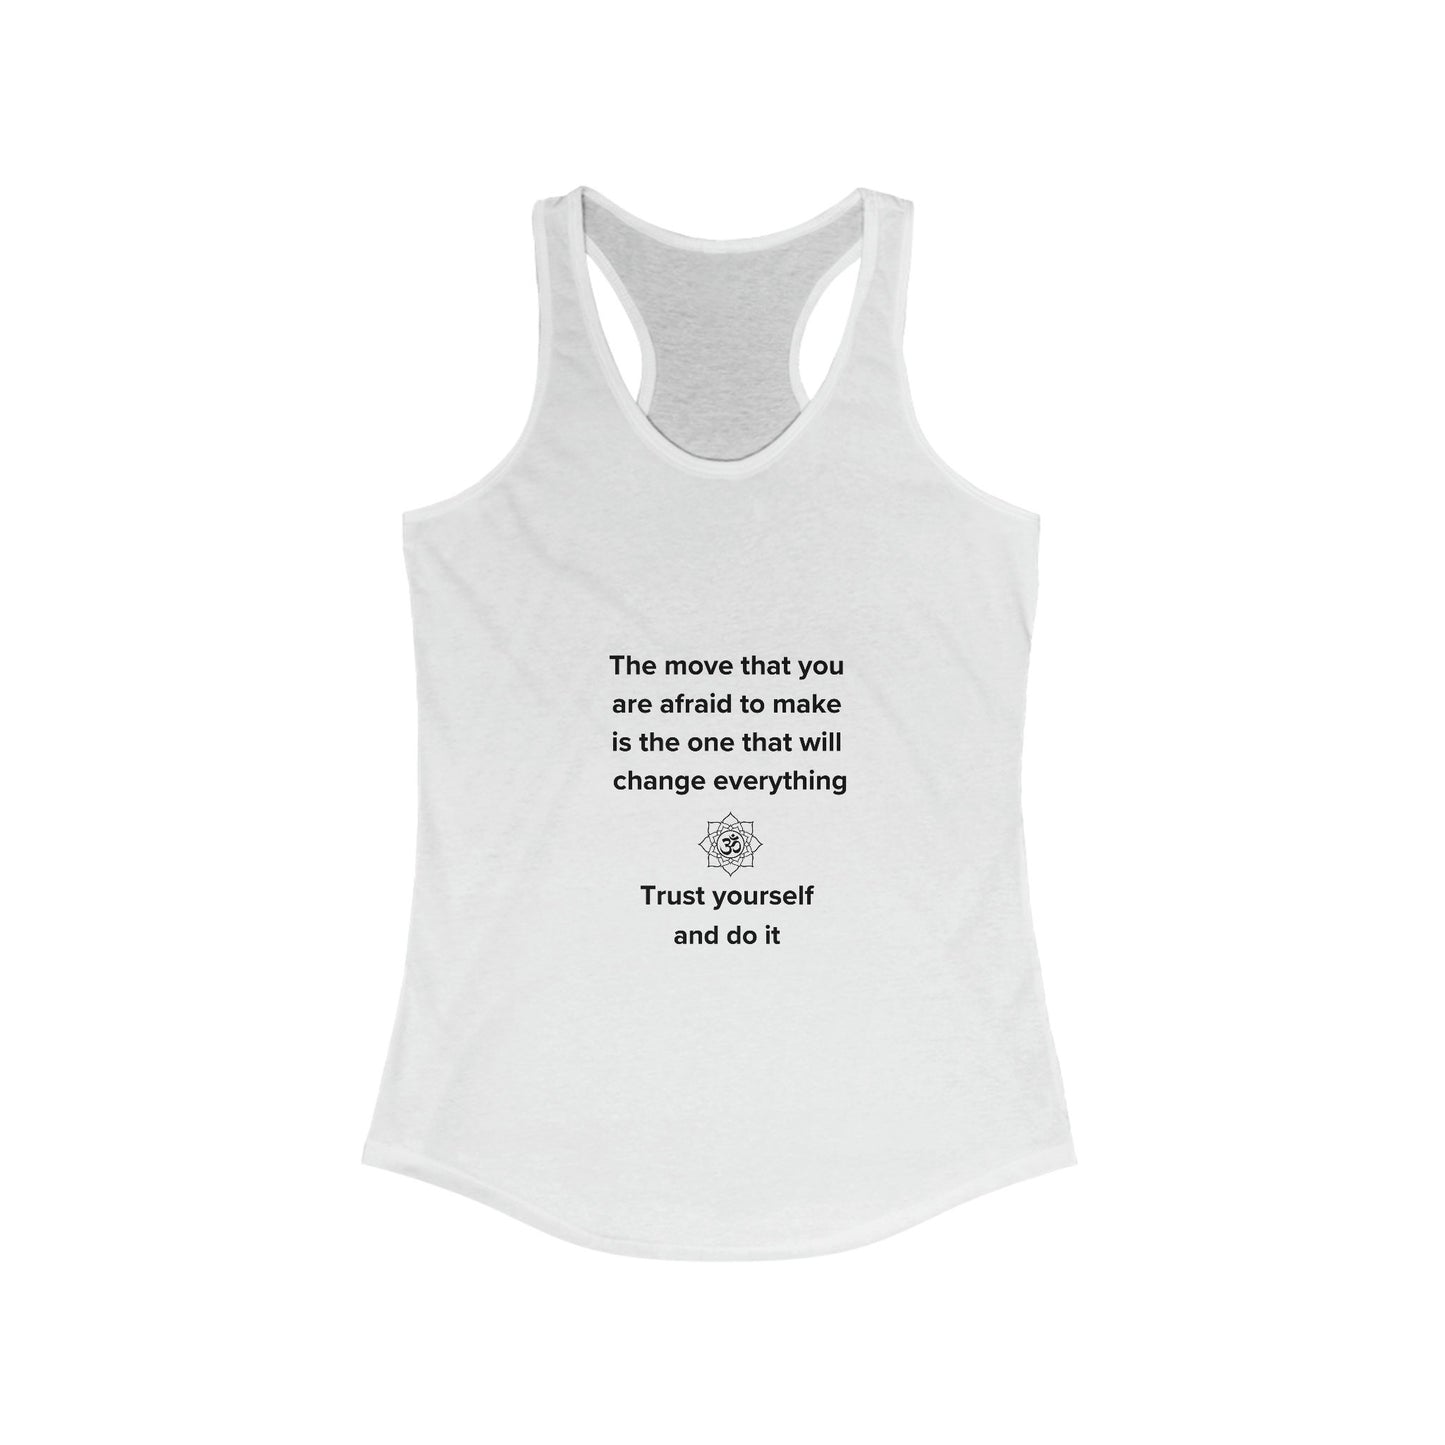 Namaste Trust Yourself and Do It. Women's Ideal Racerback Tank